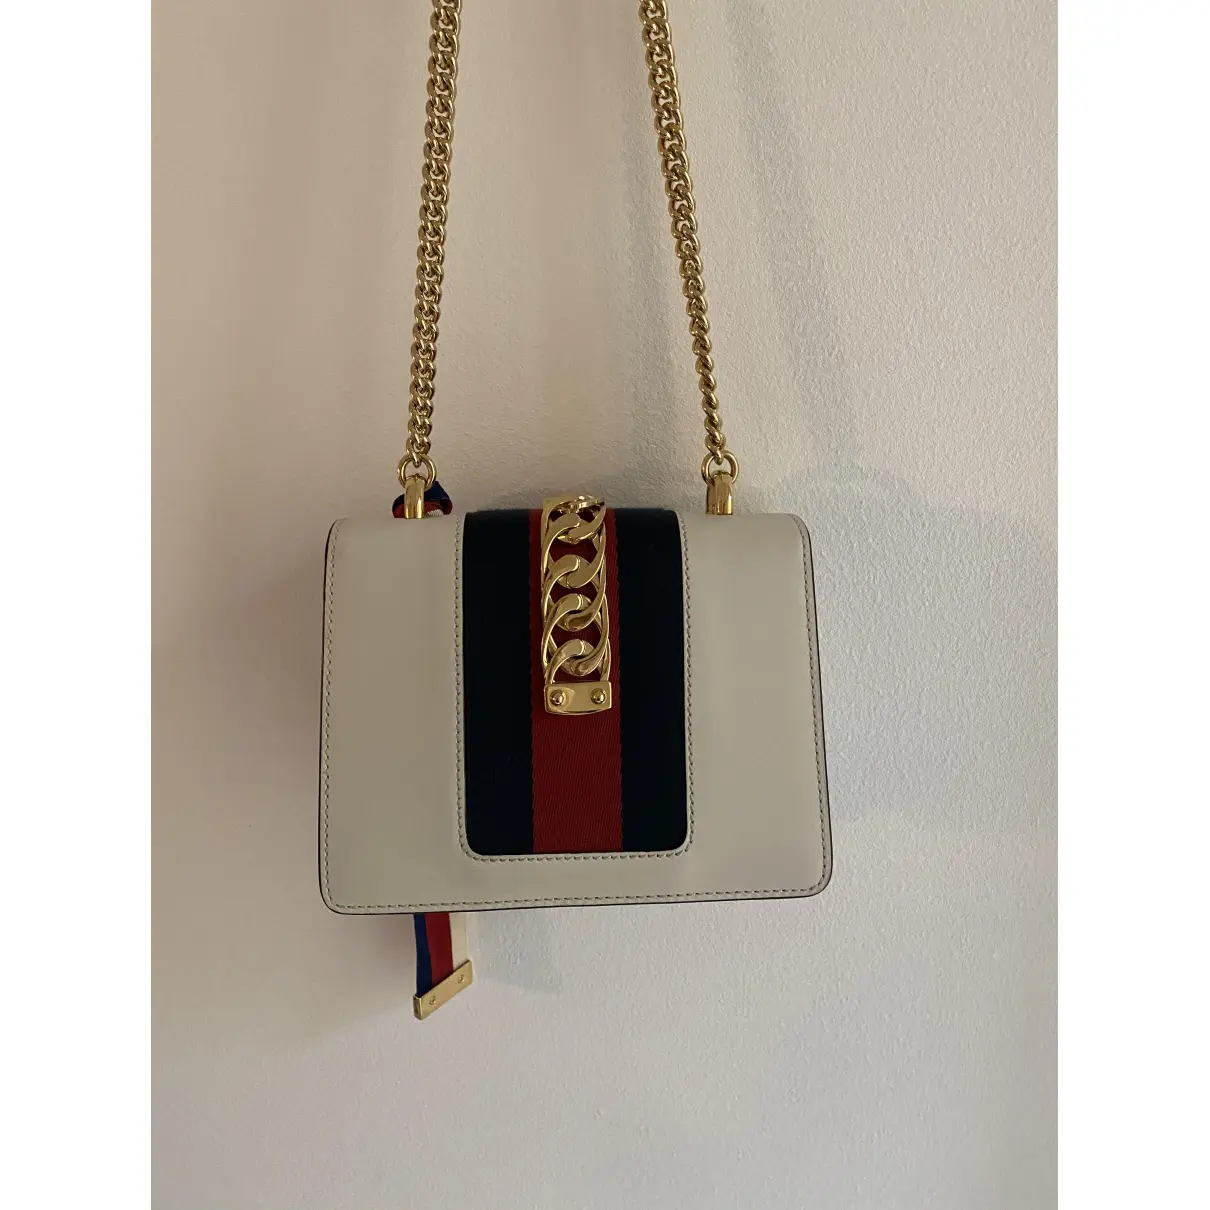 Buy Gucci Sylvie leather clutch bag online